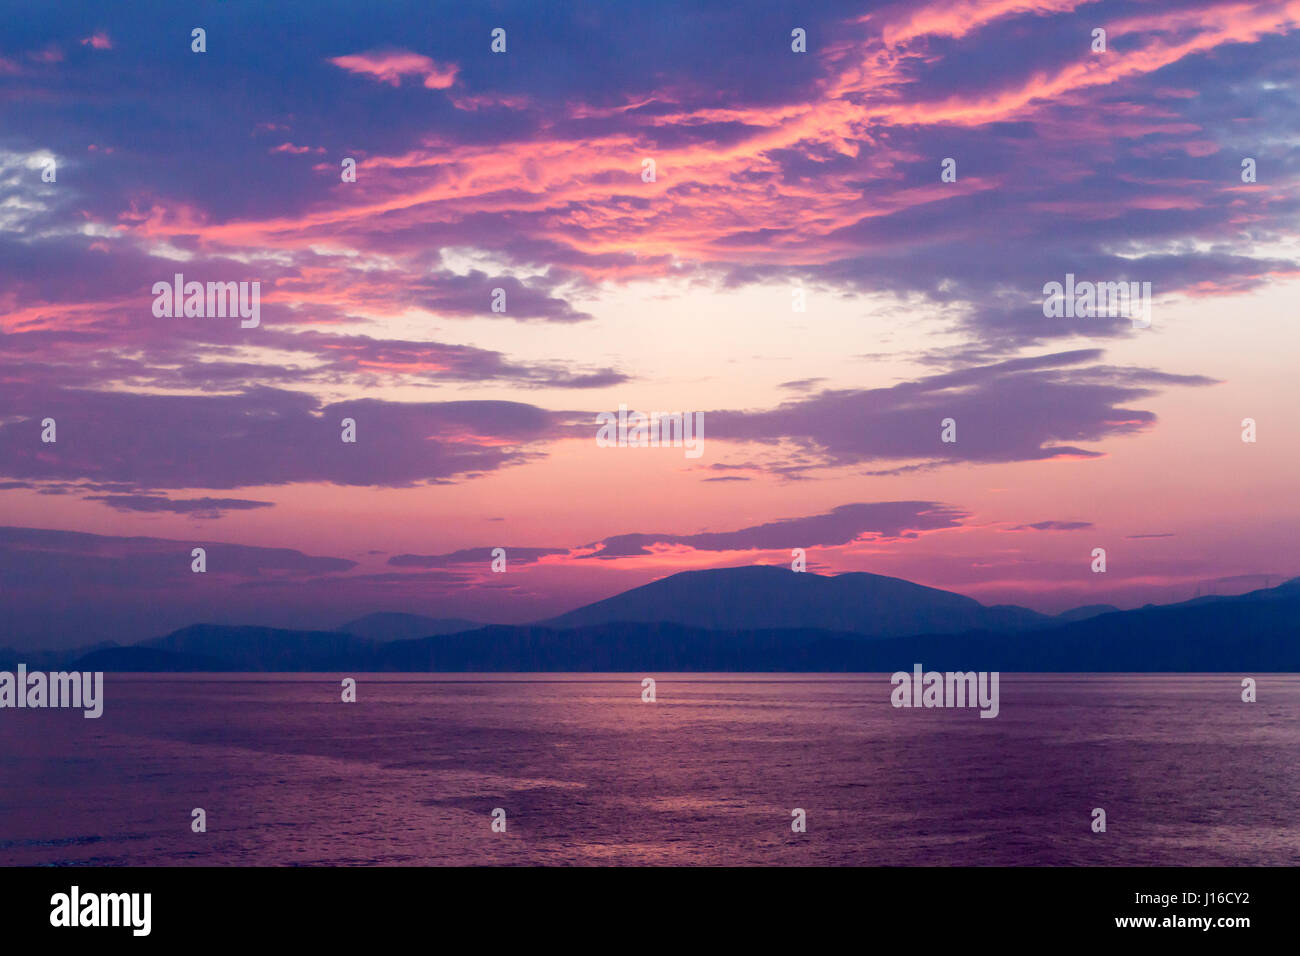 Incredible sunset among the islands in the sea Stock Photo